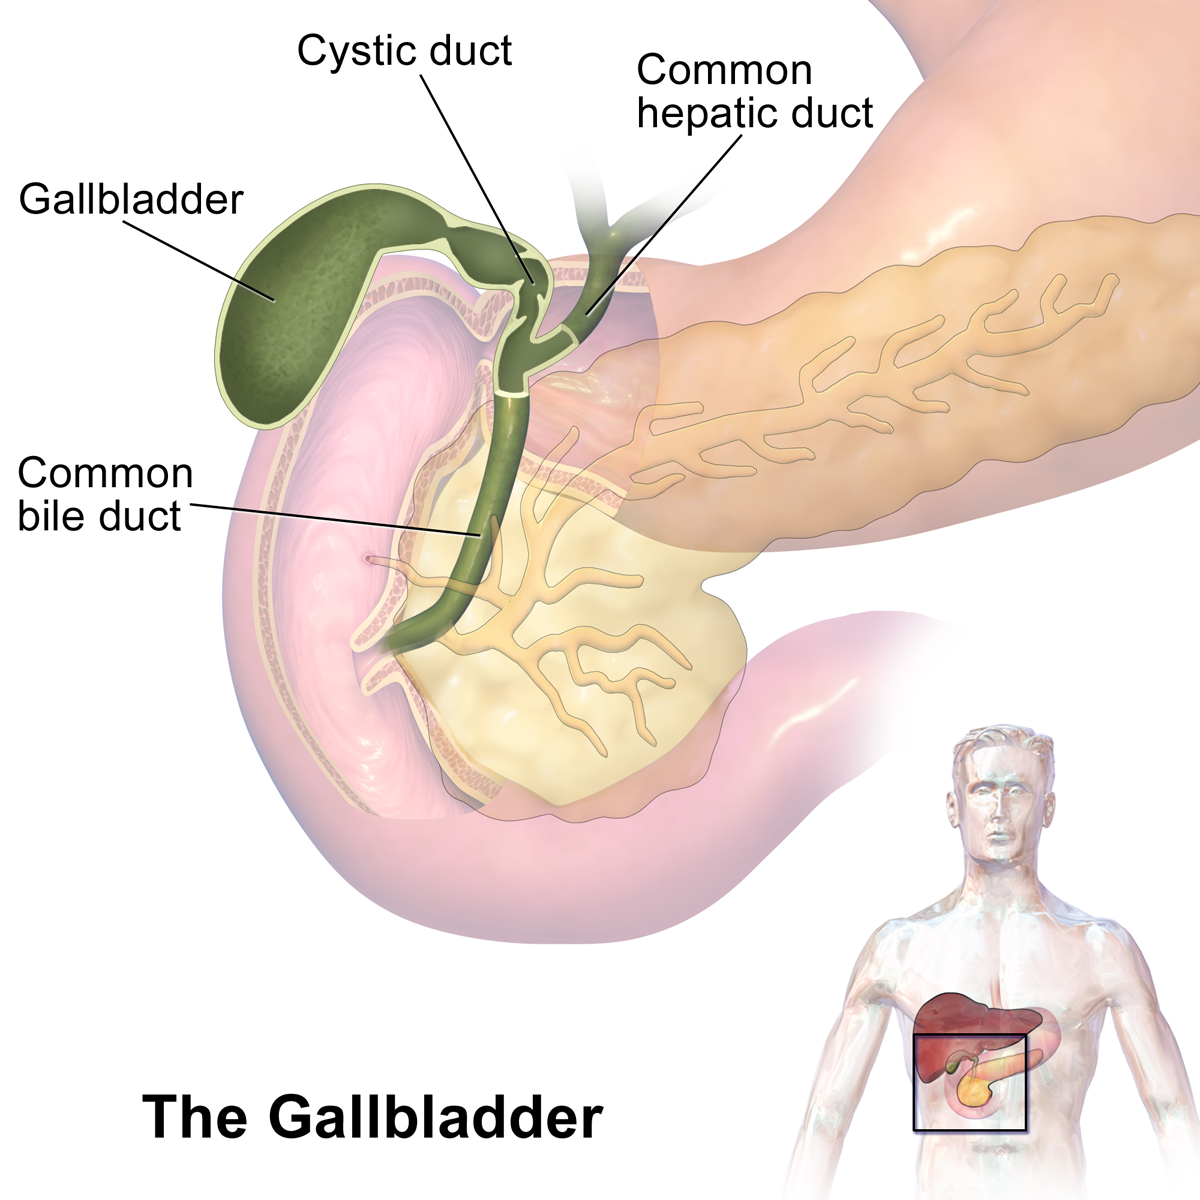 Location of the gallbladder and related ducts